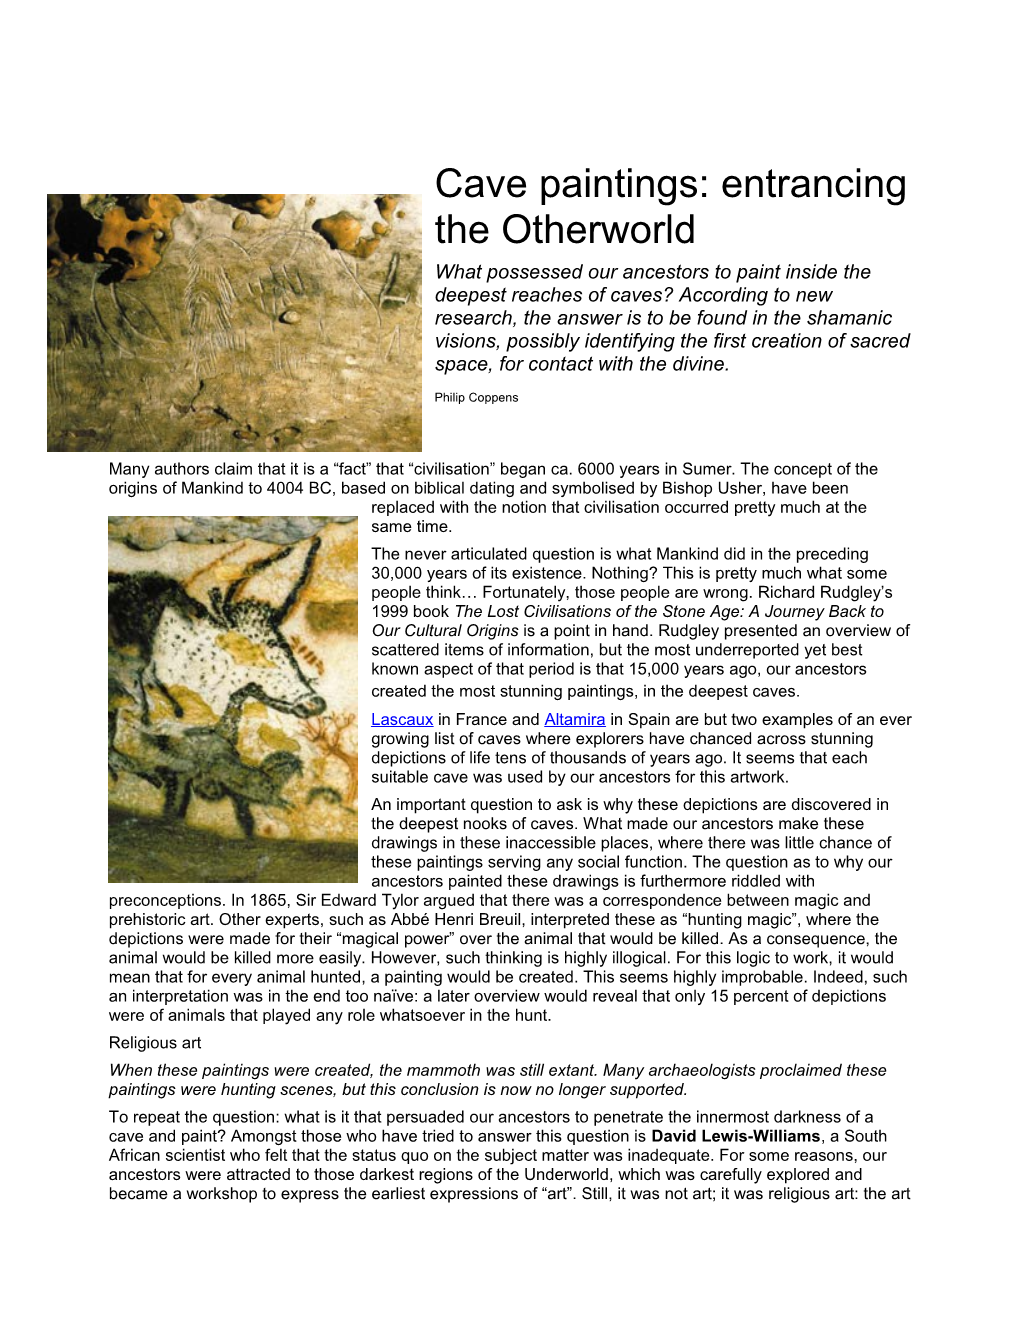 Cave Paintings: Entrancing the Otherworld